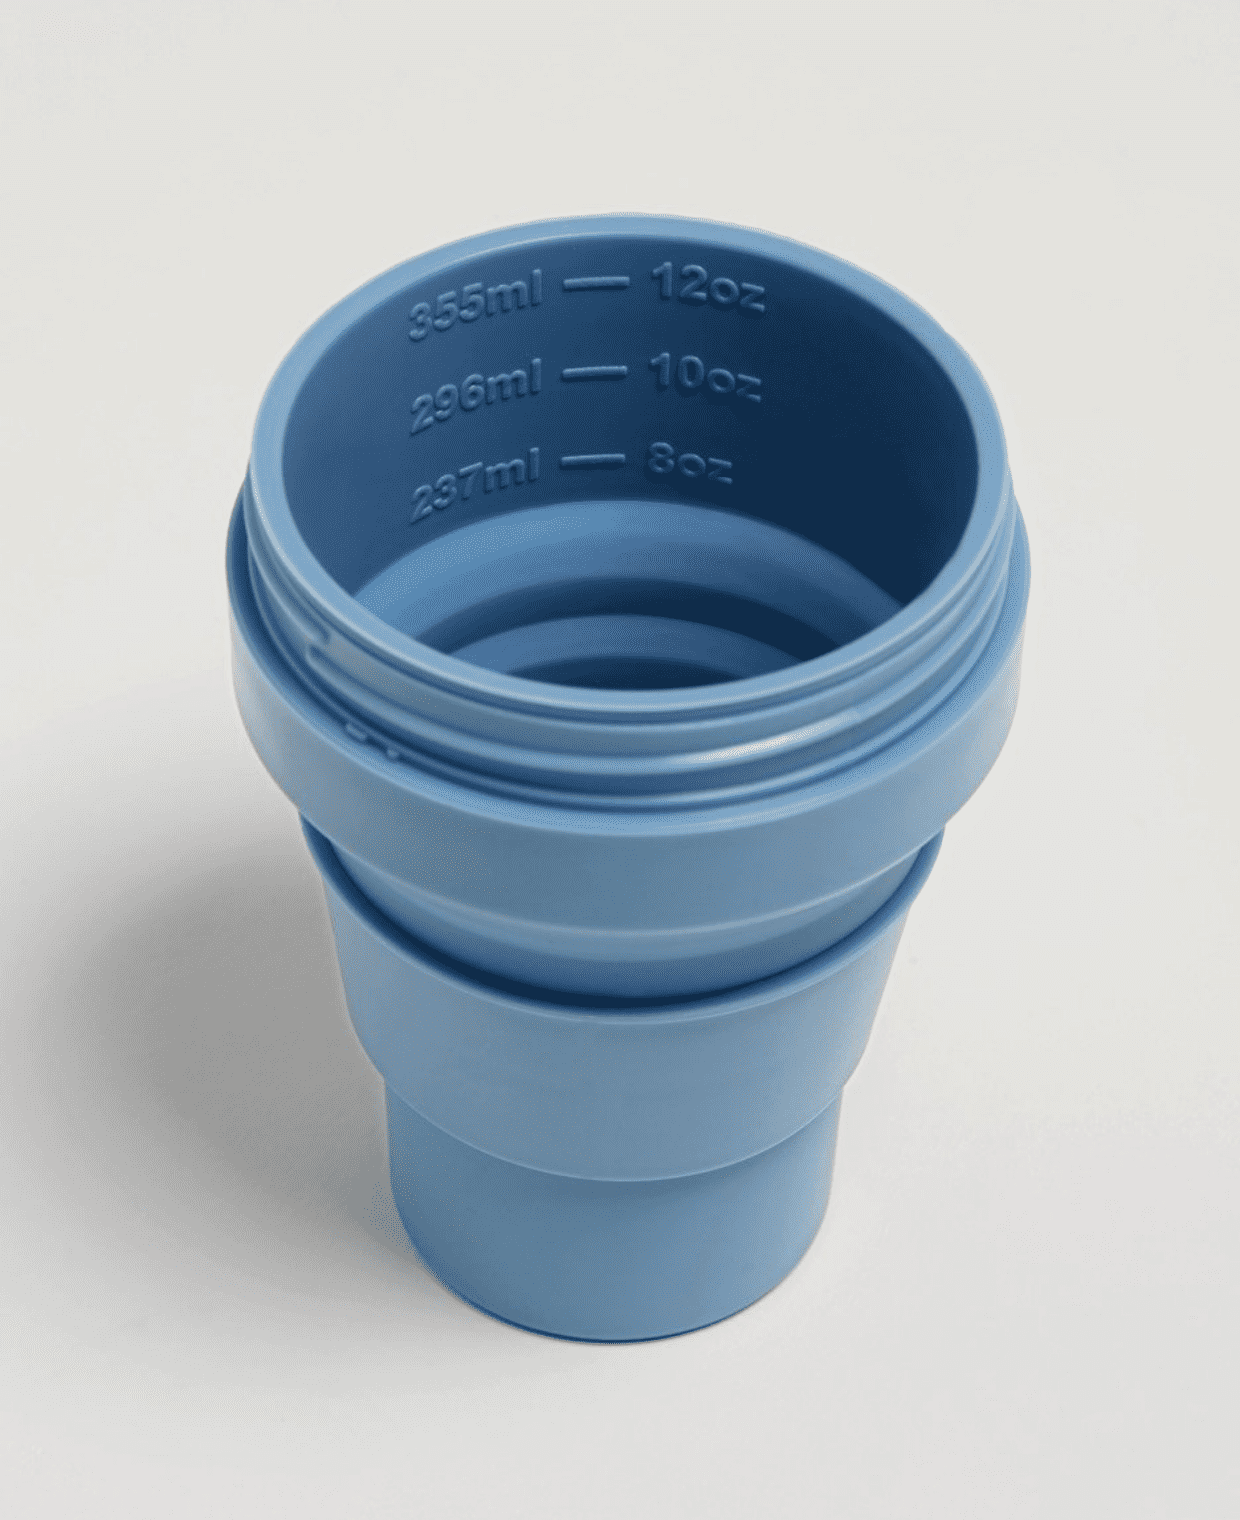 Stojo Green Collapsible Pocket Cup 12oz/355ml